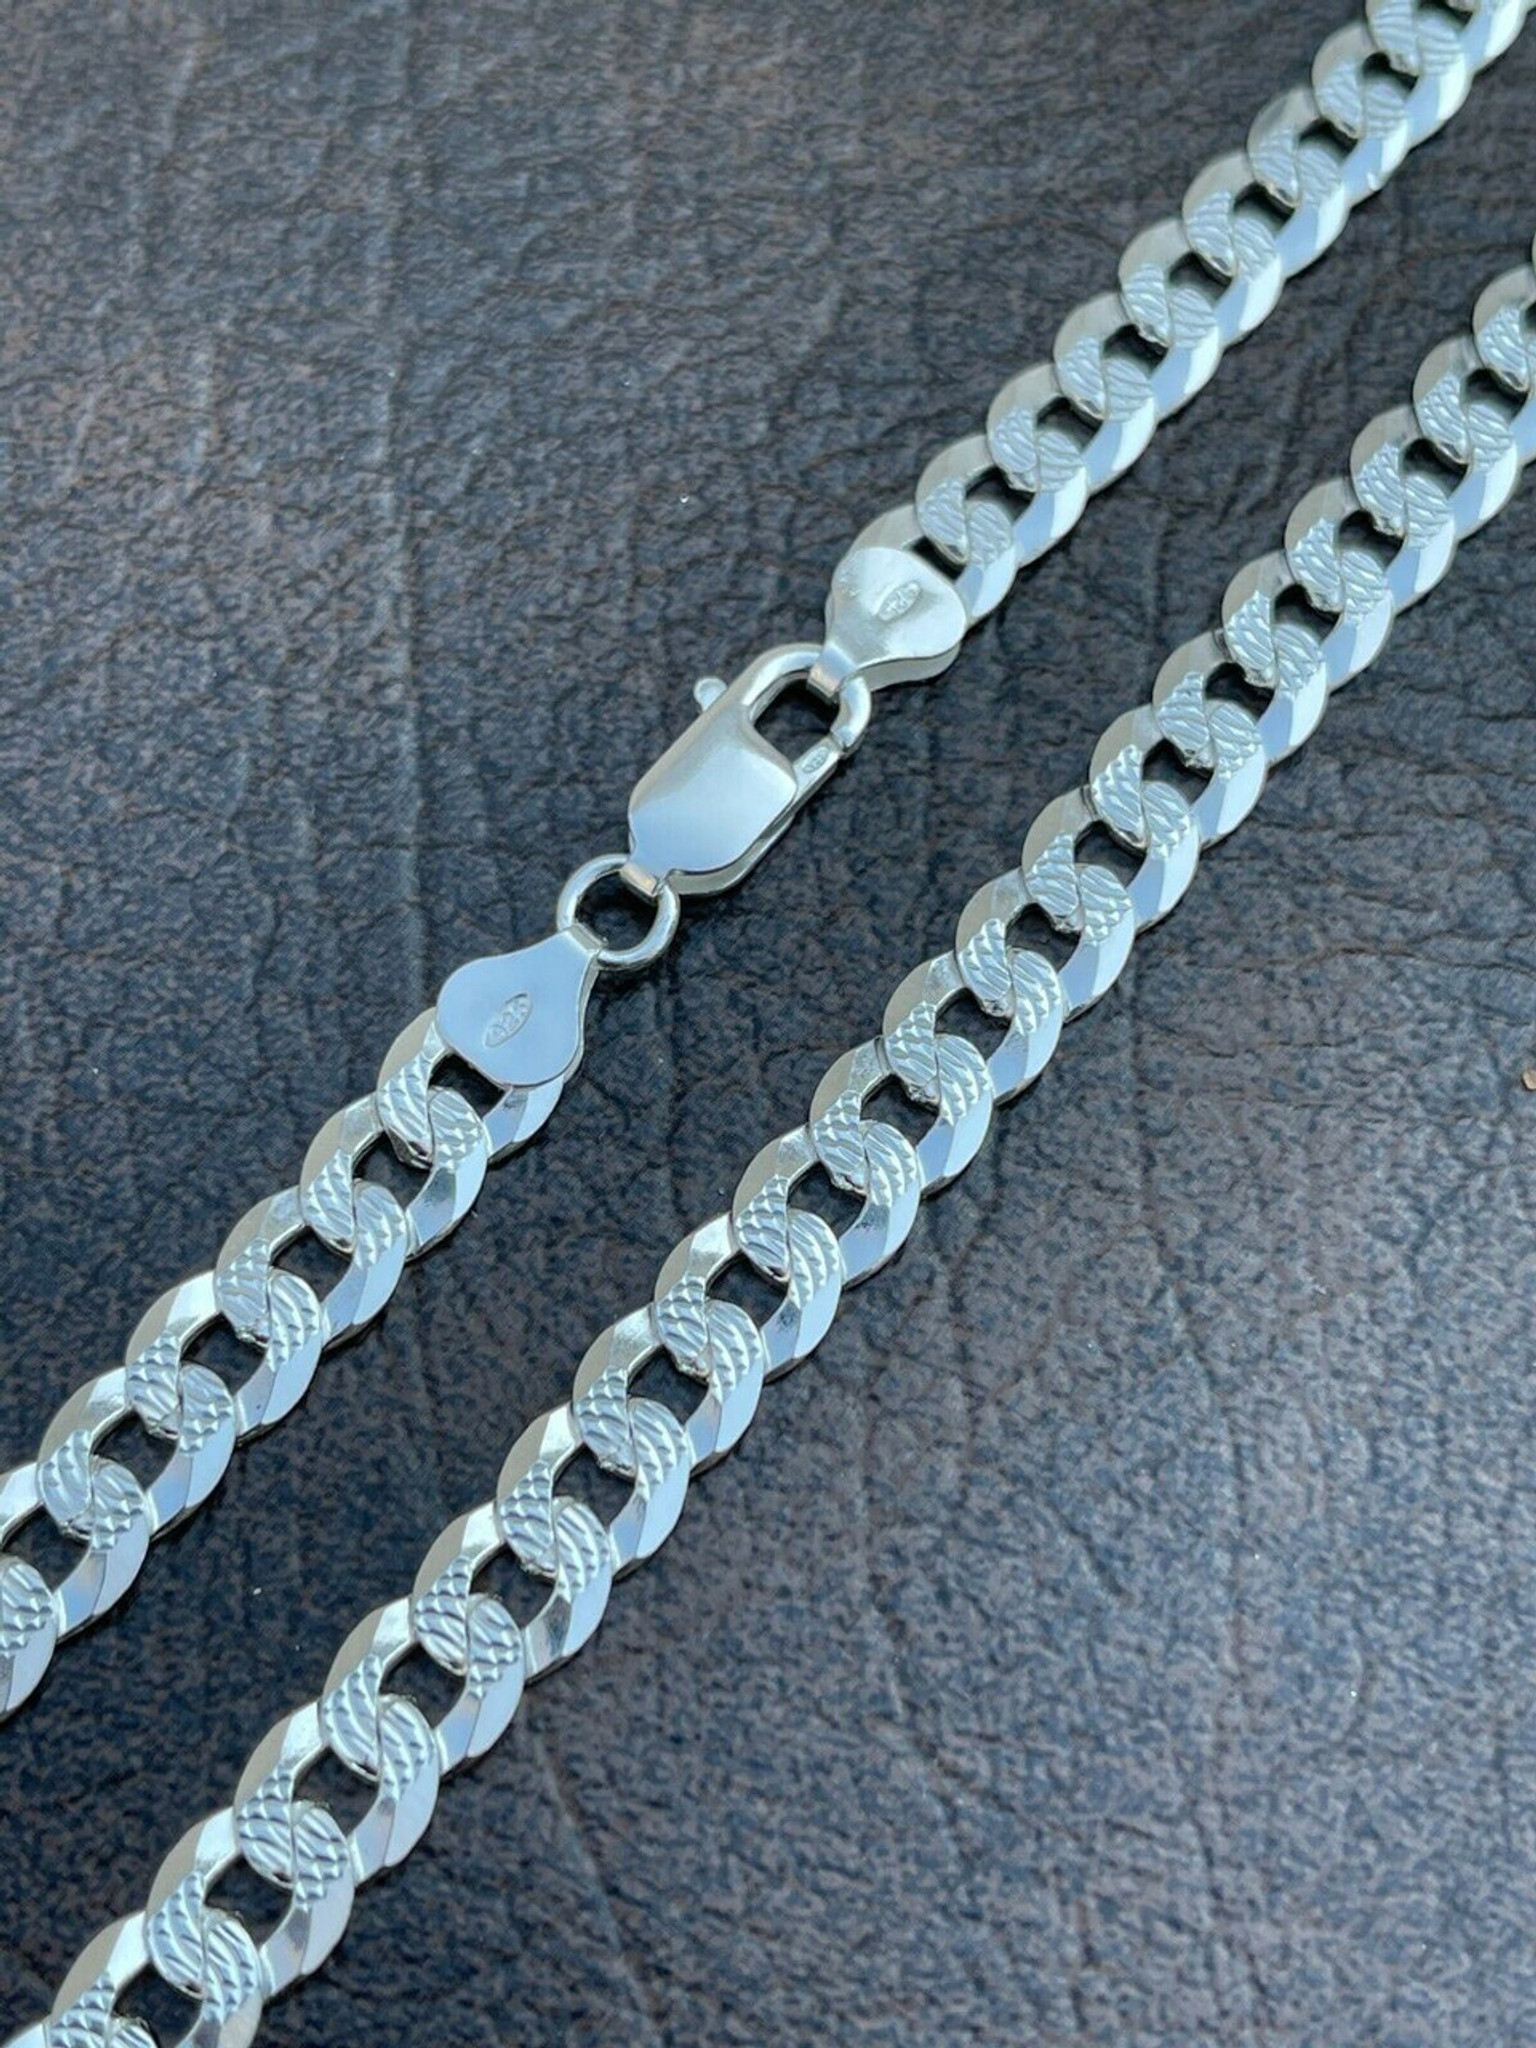 8mm Men's Figaro Link Chain Necklace Solid 925 Sterling Silver | JFM